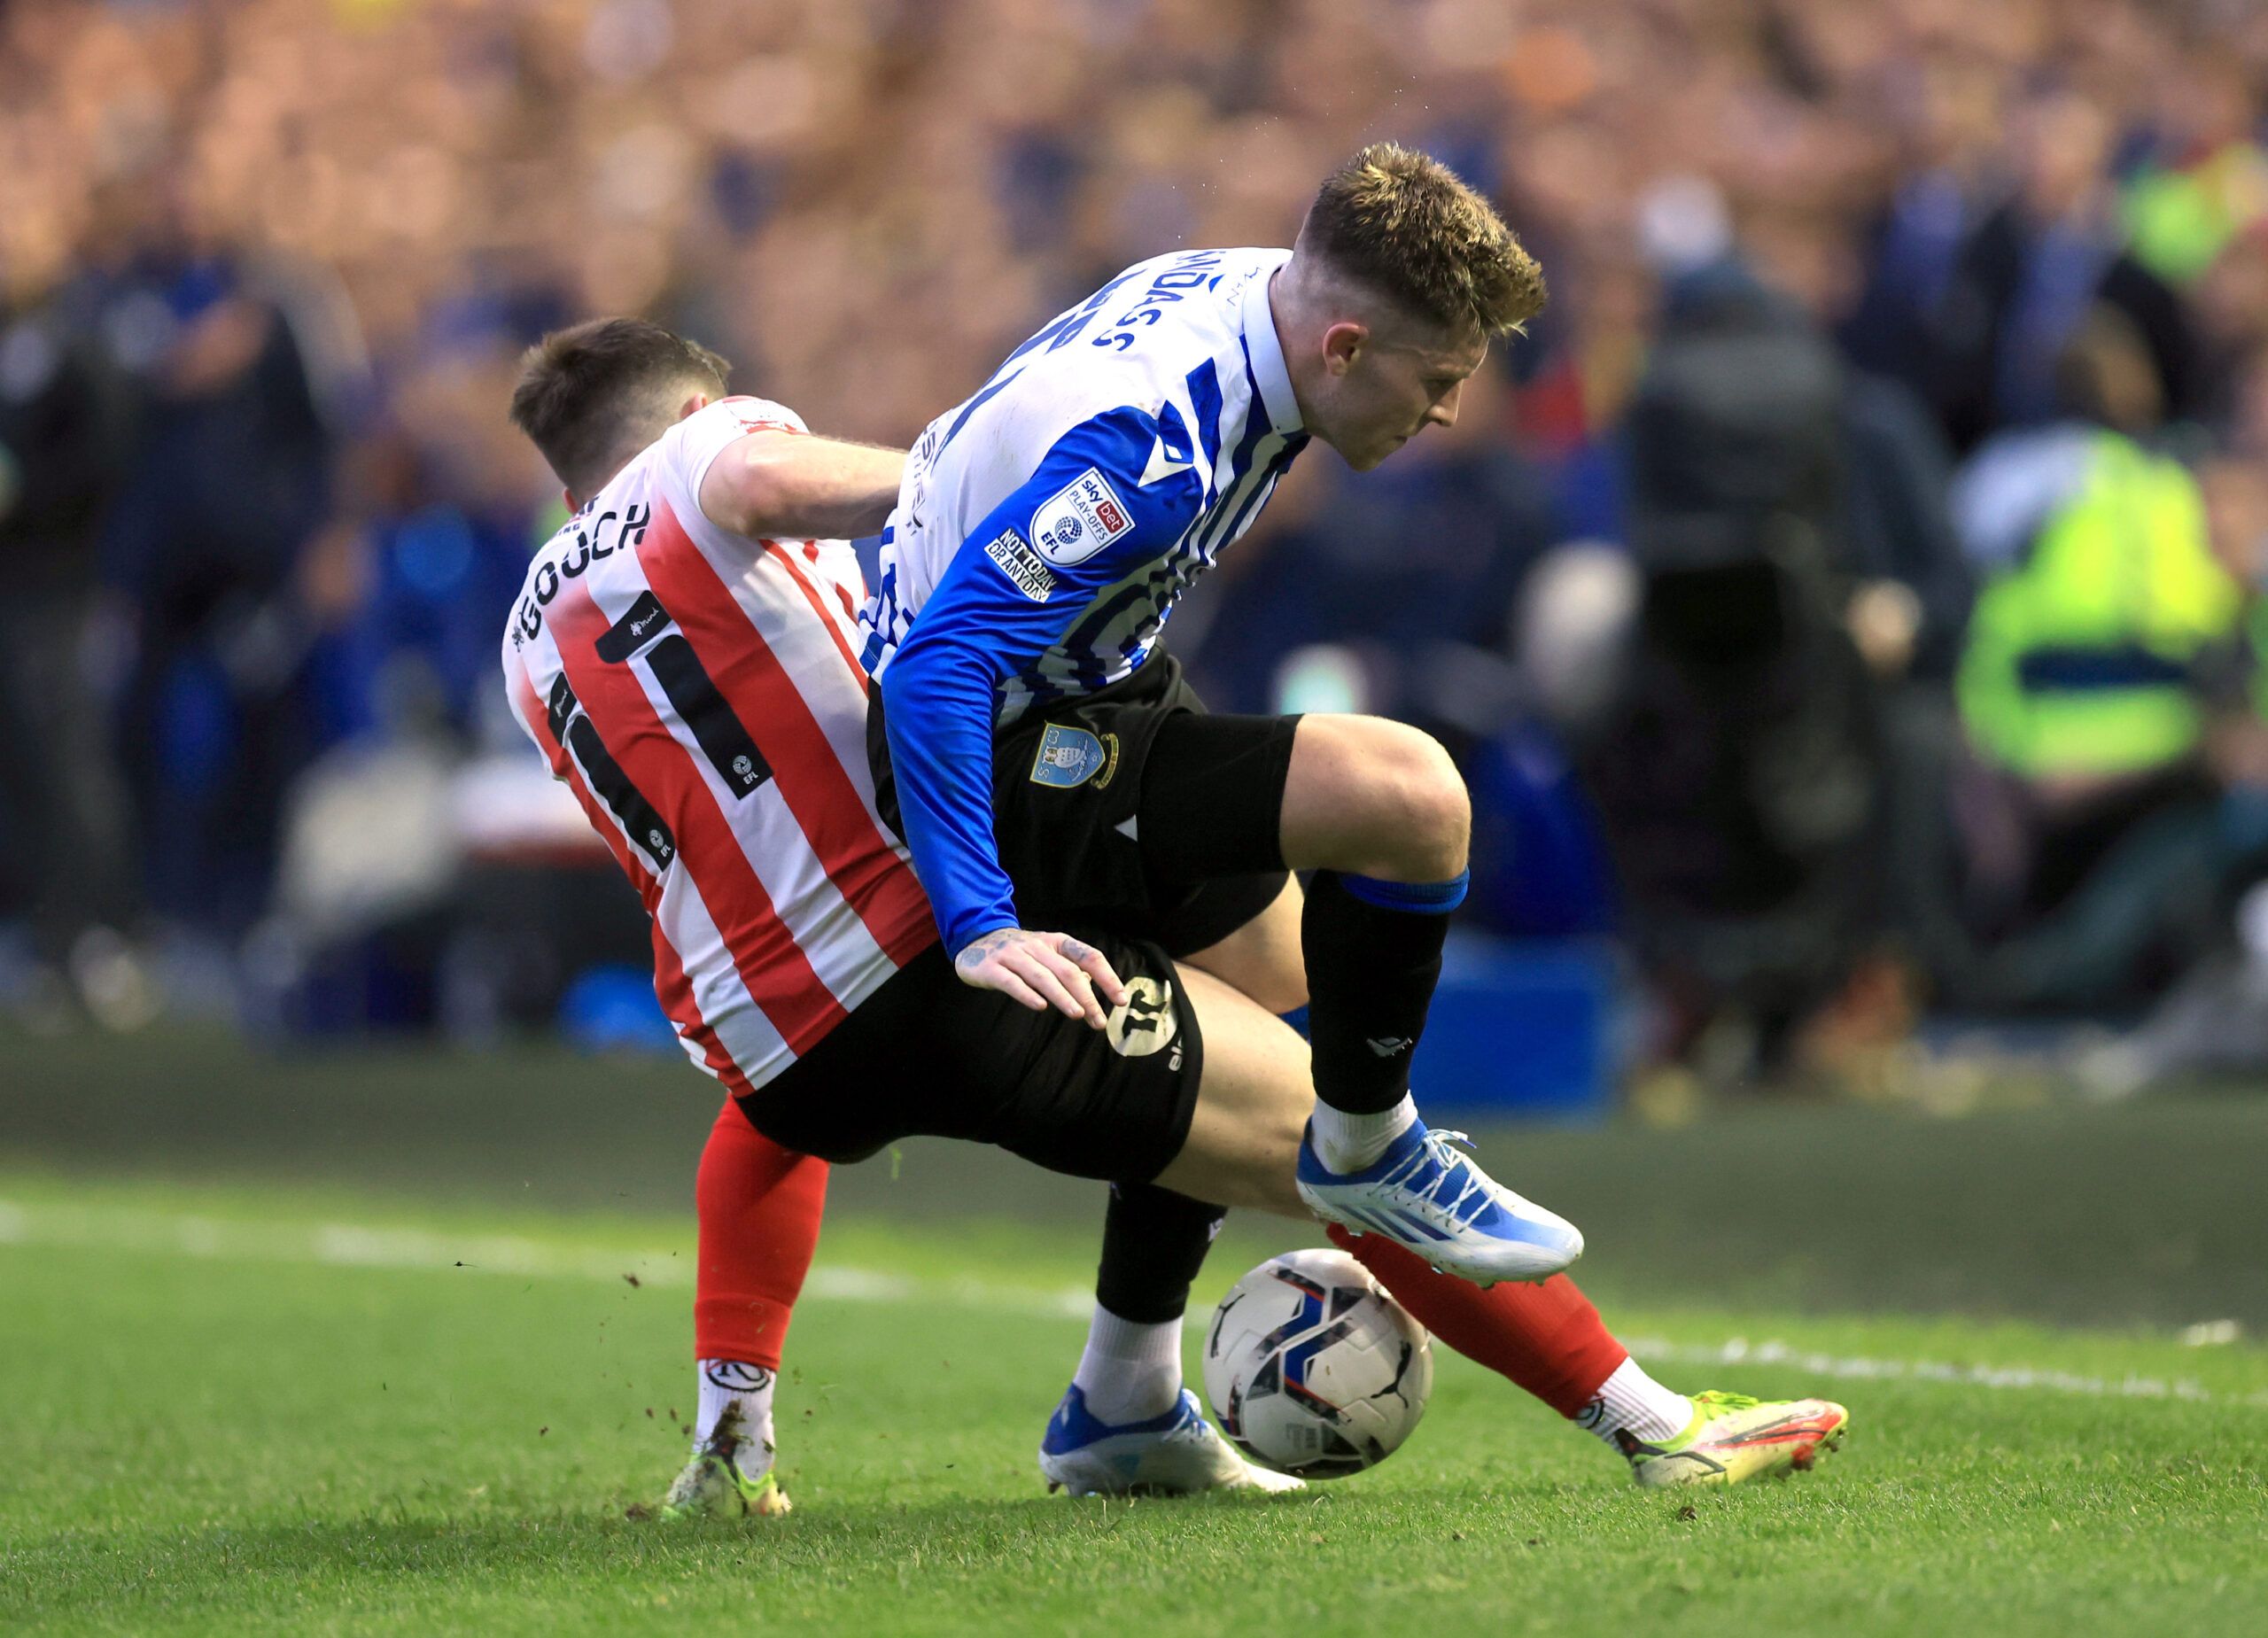 Soccer Football - League One - Play-Off Semi Final Second Leg - Sheffield Wednesday v Sunderland - Hillsborough Stadium, Sheffield, Britain - May 9, 2022 Sunderland's Lynden Gooch in action with Sheffield Wednesday's Josh Windass Action Images/Lee Smith EDITORIAL USE ONLY. No use with unauthorized audio, video, data, fixture lists, club/league logos or 'live' services. Online in-match use limited to 75 images, no video emulation. No use in betting, games or single club /league/player publication